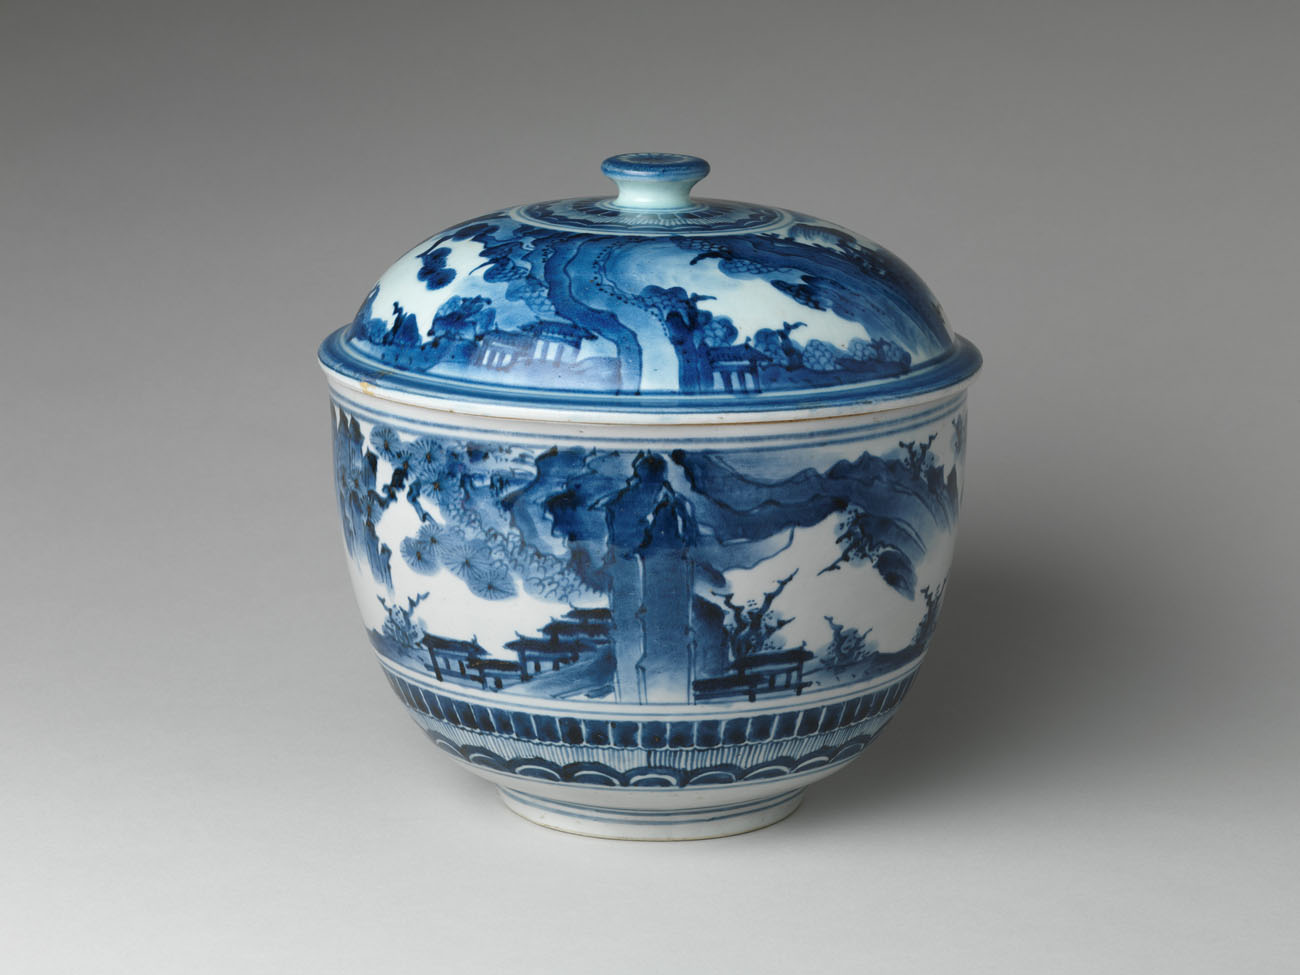 A similar work of Japanese porcelain at the Metropolitan Museum of Art. It shows how the bowls at the Getty would have appeared when they were made, before being shipped to Europe. Tureen with Landscape, late 1600s, Japanese. Diameter 10 inches. The Metropolitan Museum of Art, 2002.447.47a,b. Bequest of Dr. and Mrs. Roger G. Gerry, 2000. 